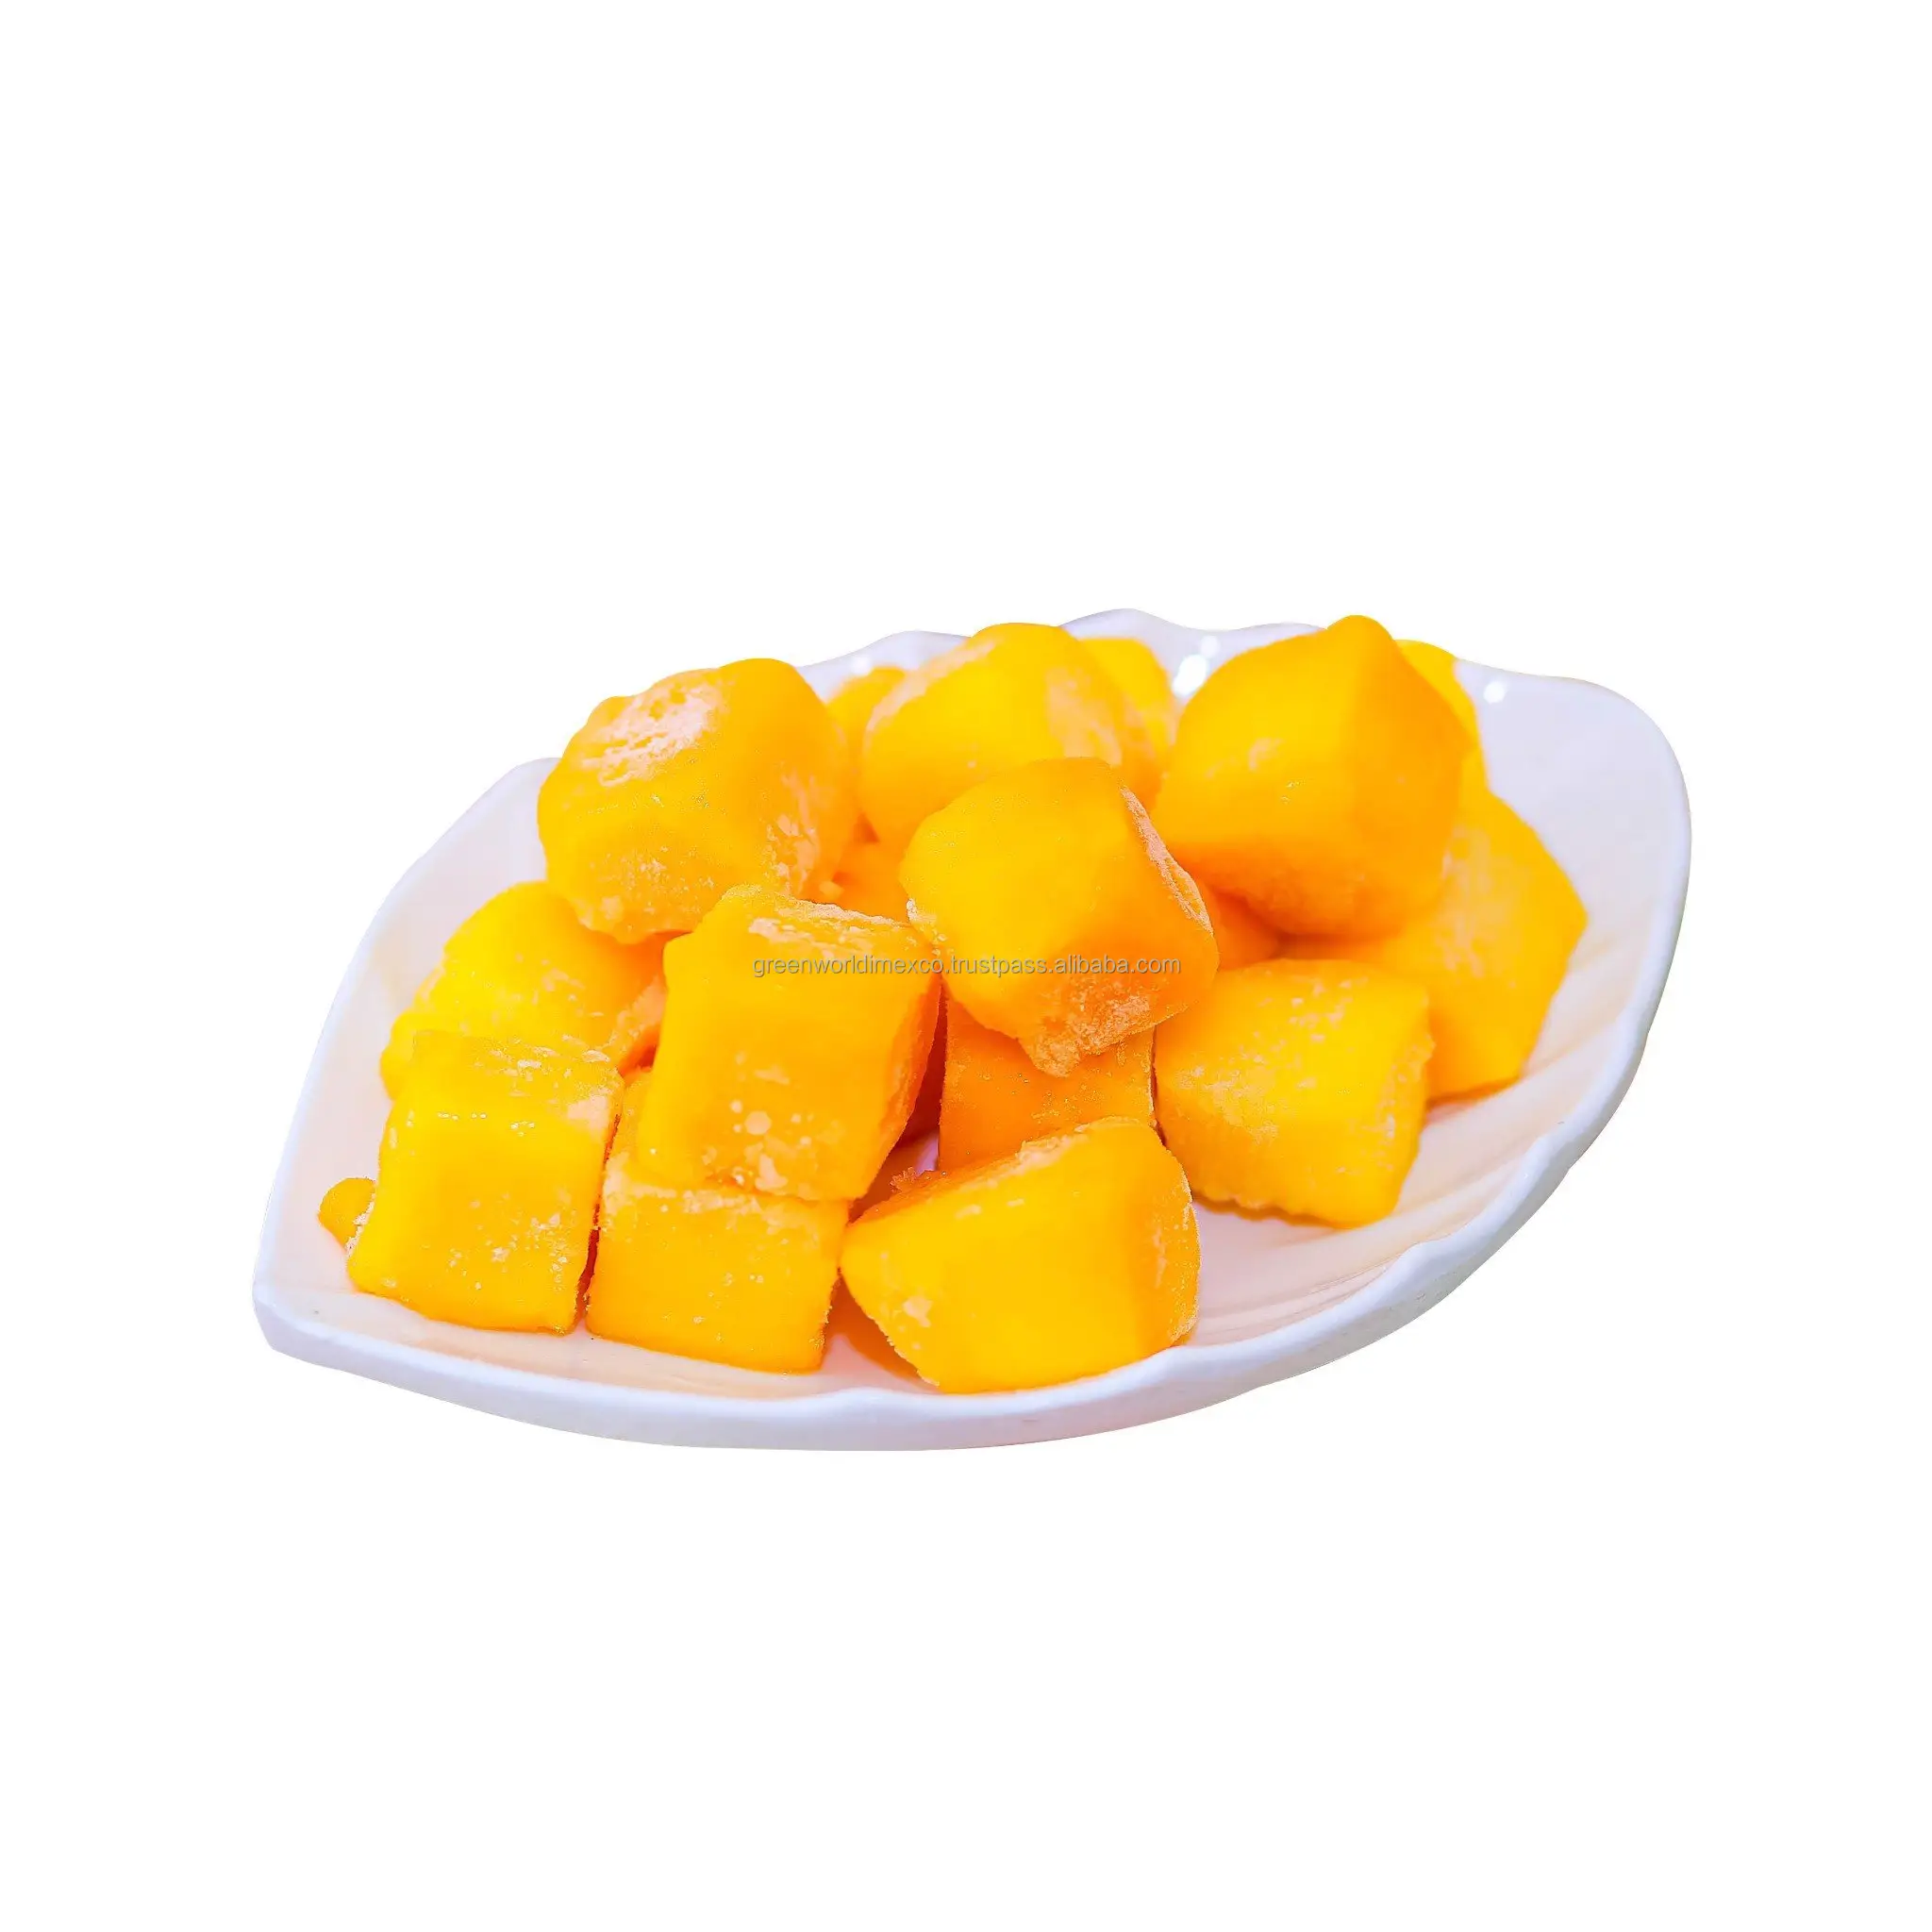 FROZEN MANGO WITH HIGH+ QUALITY AT THE BEST PRICE FROM GREEN WORLD - HOT SALE IN THIS MONTH - THE GOOD OPTION FOR YOU